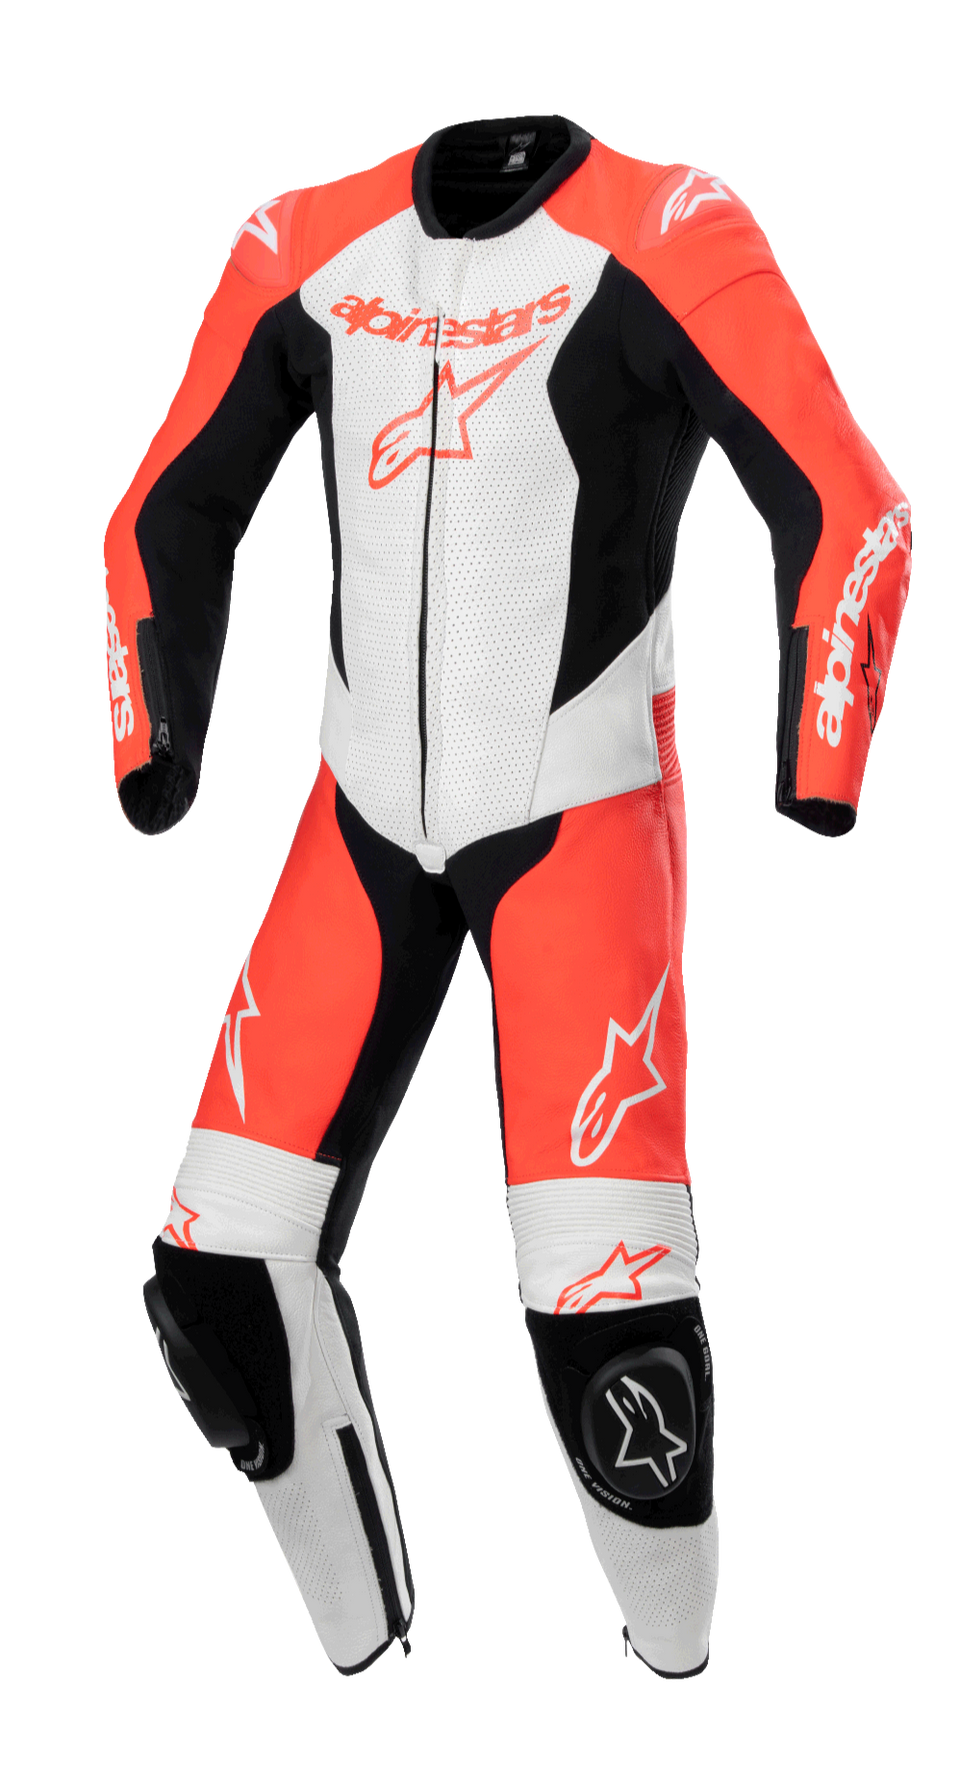 All Moto Youth Products